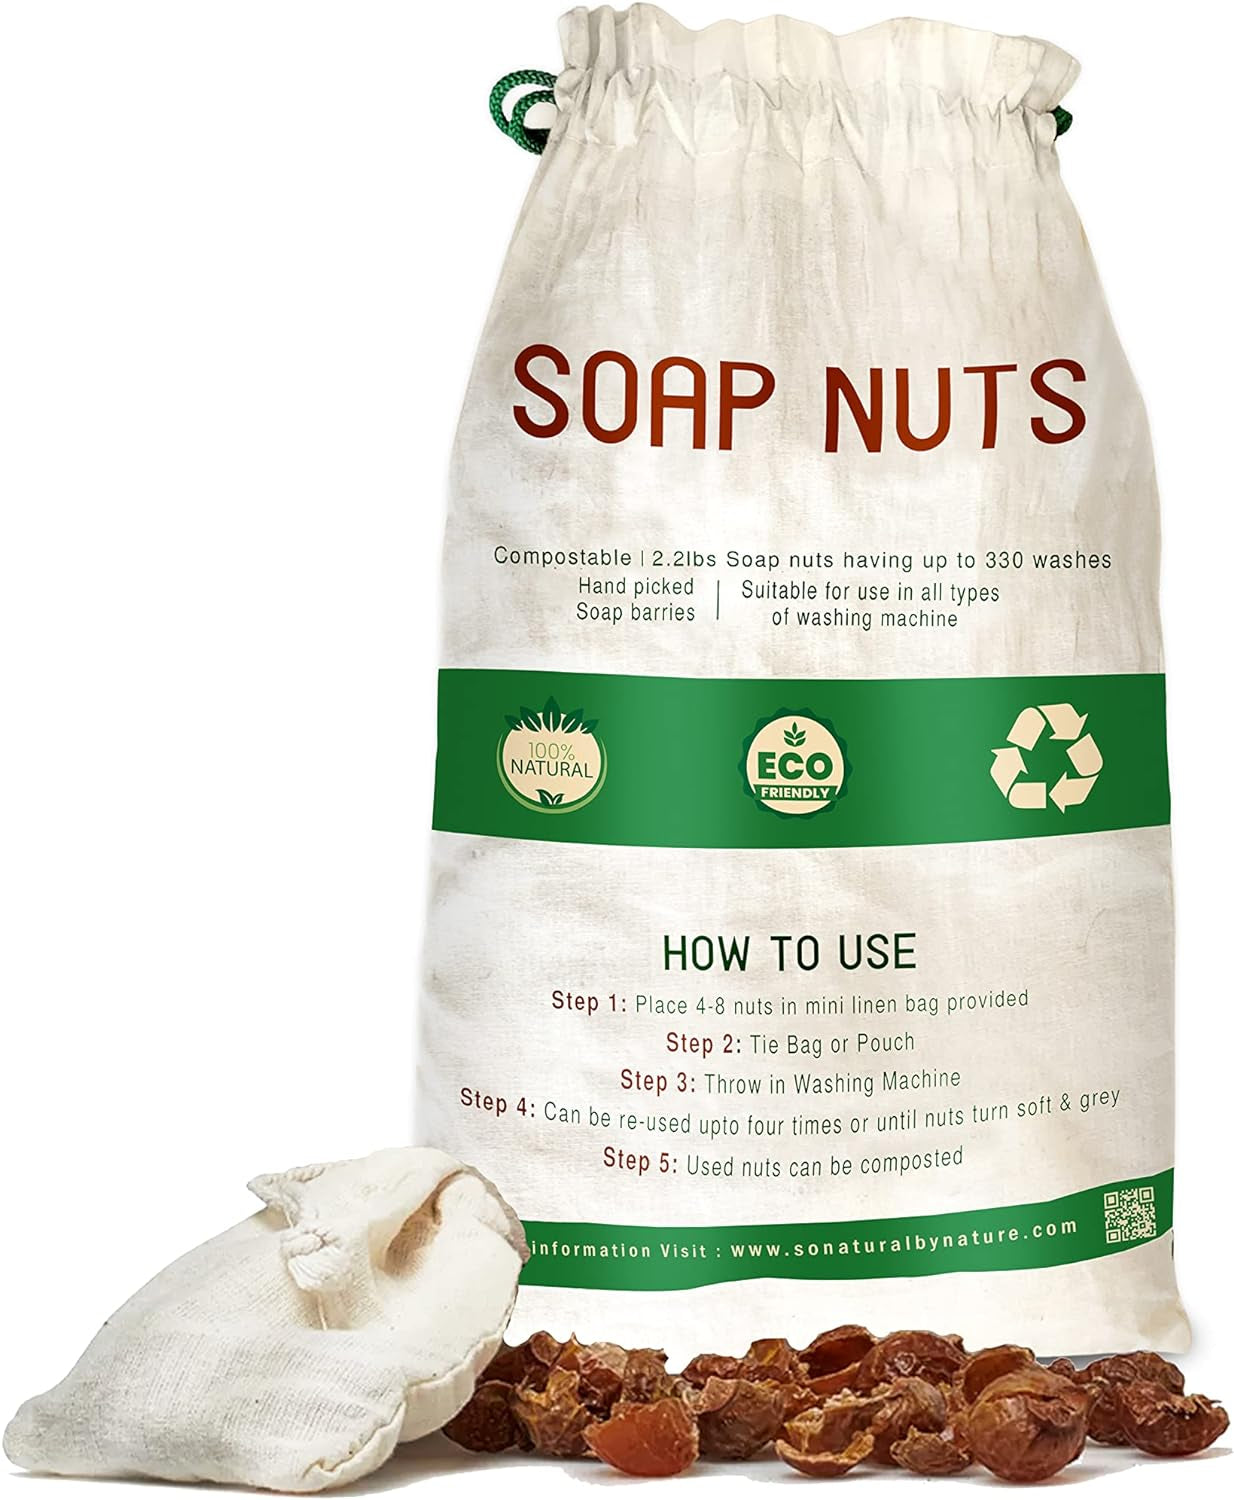 Organic Soap Nuts Deseeded 1Kg/2.2Lbs (330 Loads) with 1 Wash Bag, Eco-Friendly Soap Nuts Laundry Detergent Highly Effective, Non-Toxic, Chemical & Fragrance-Free Organic Soap Berries